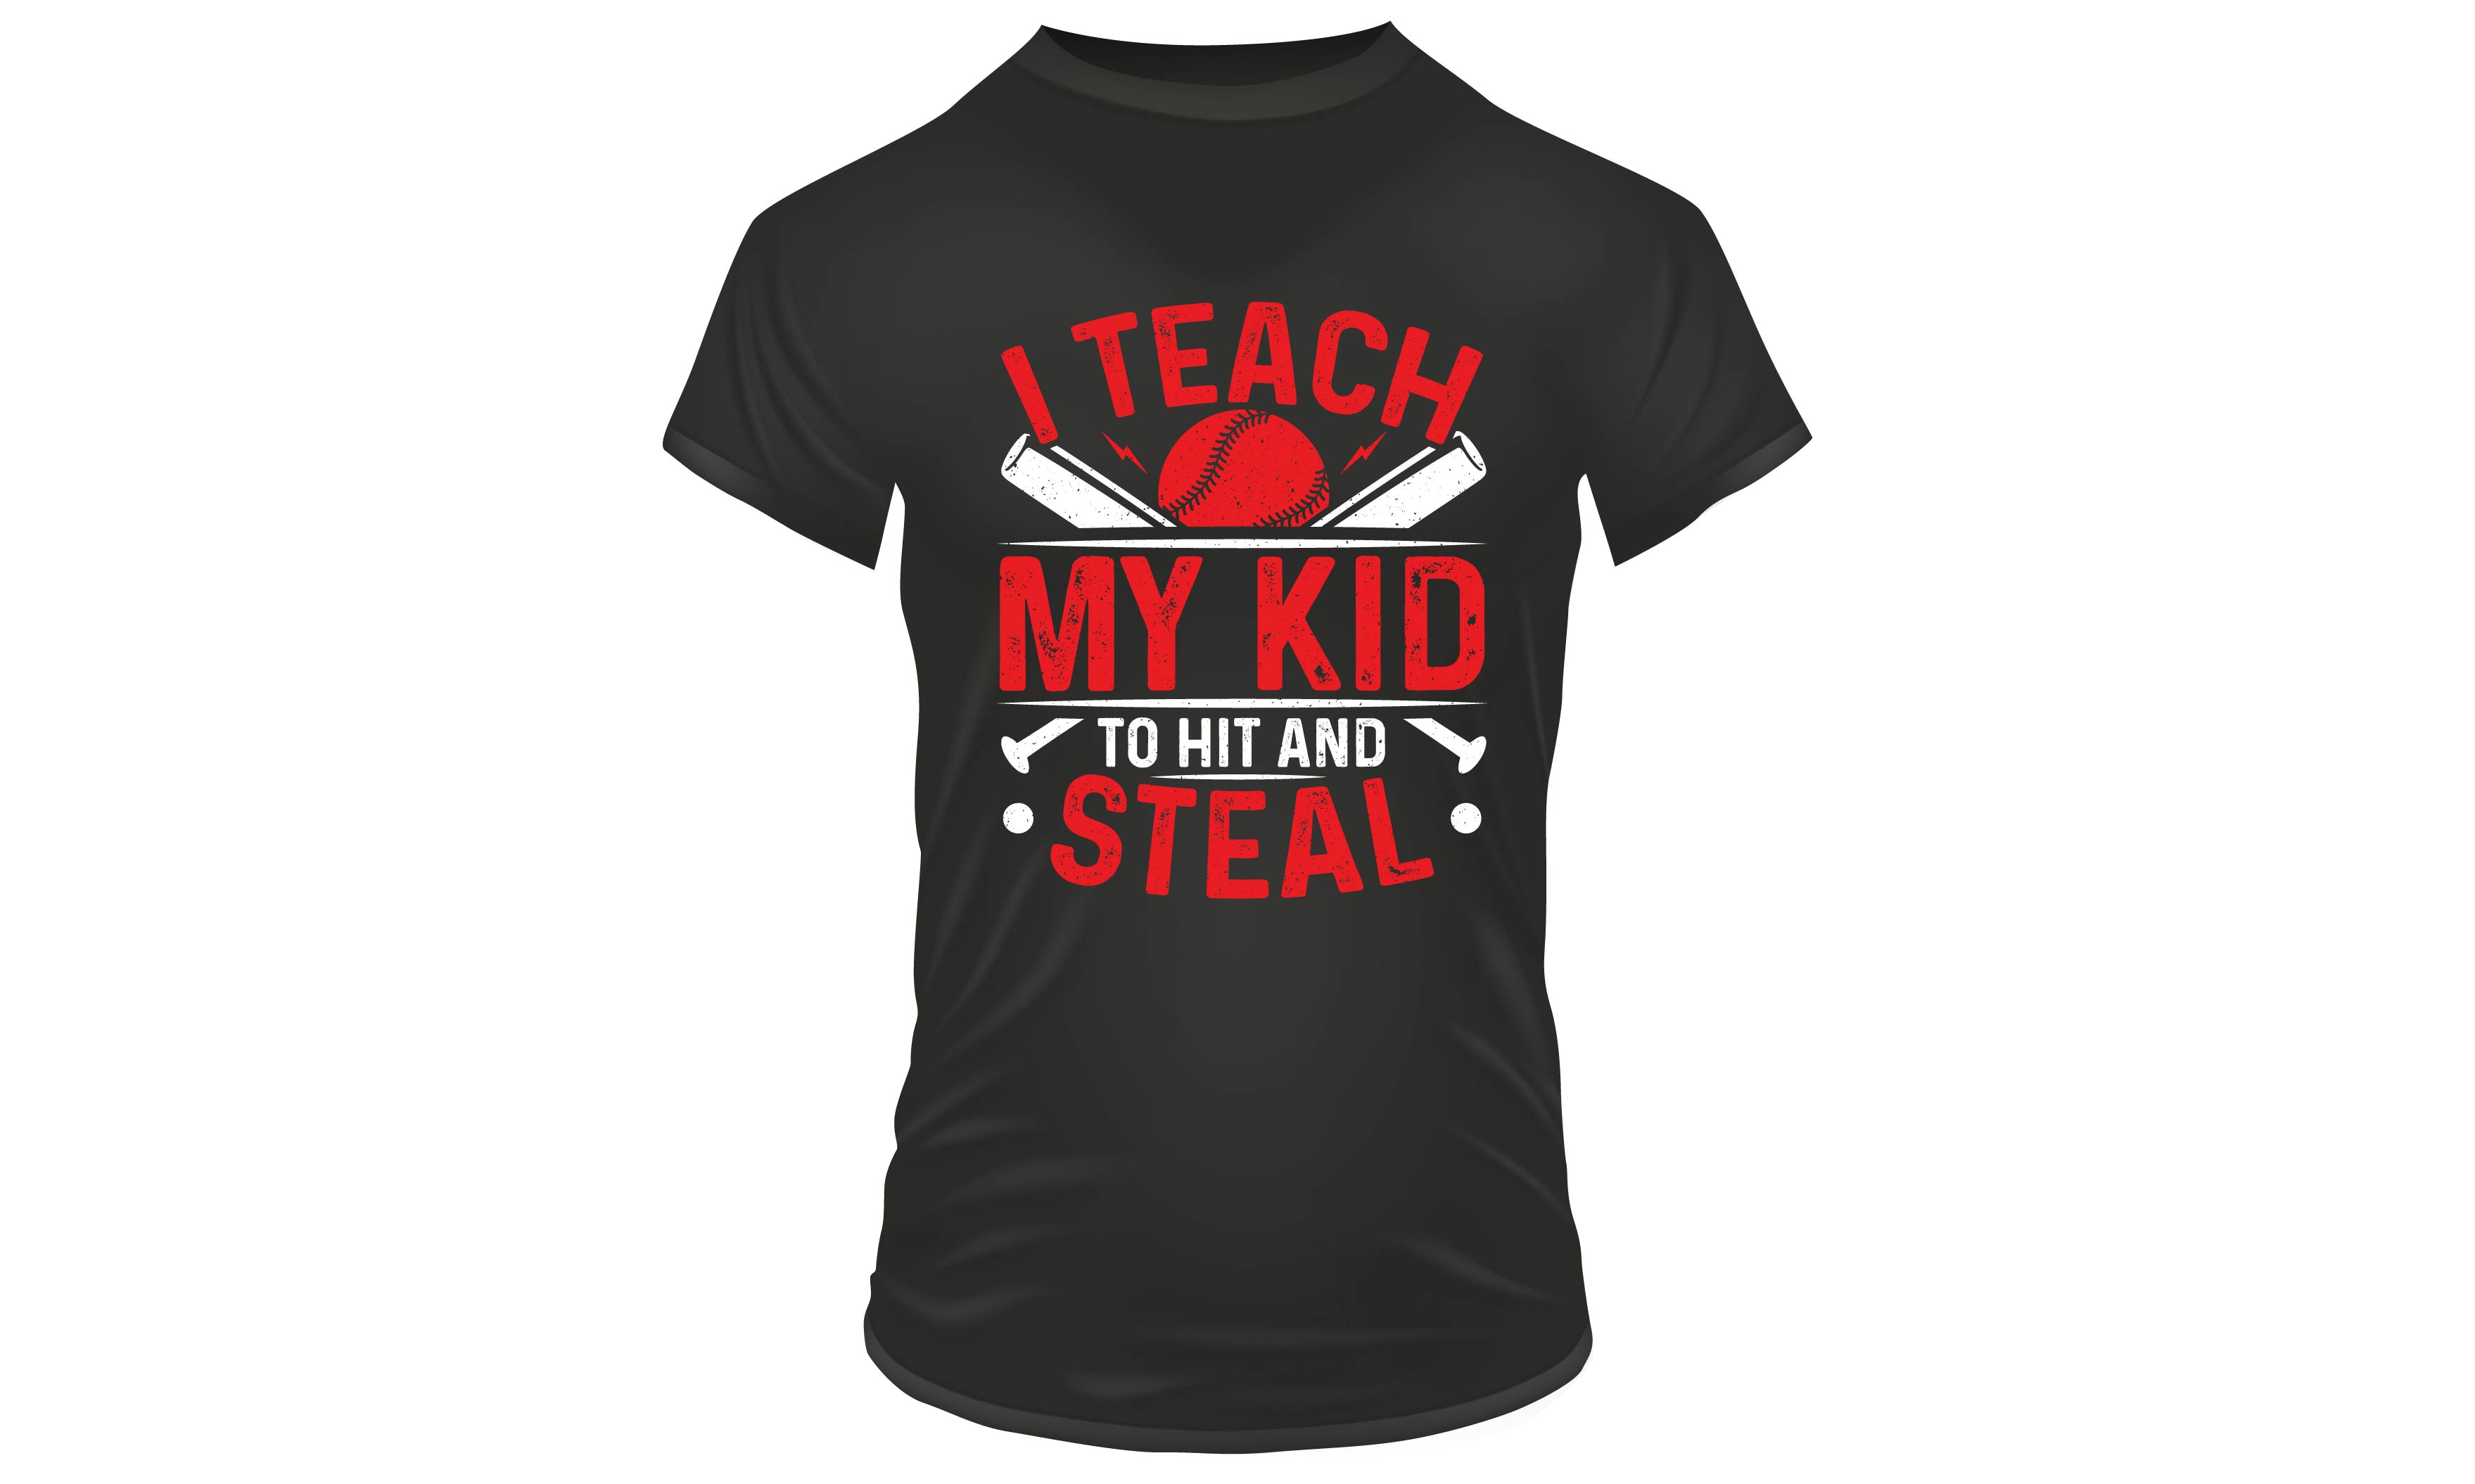 Black t - shirt that says i teach my kid to hit and steal.